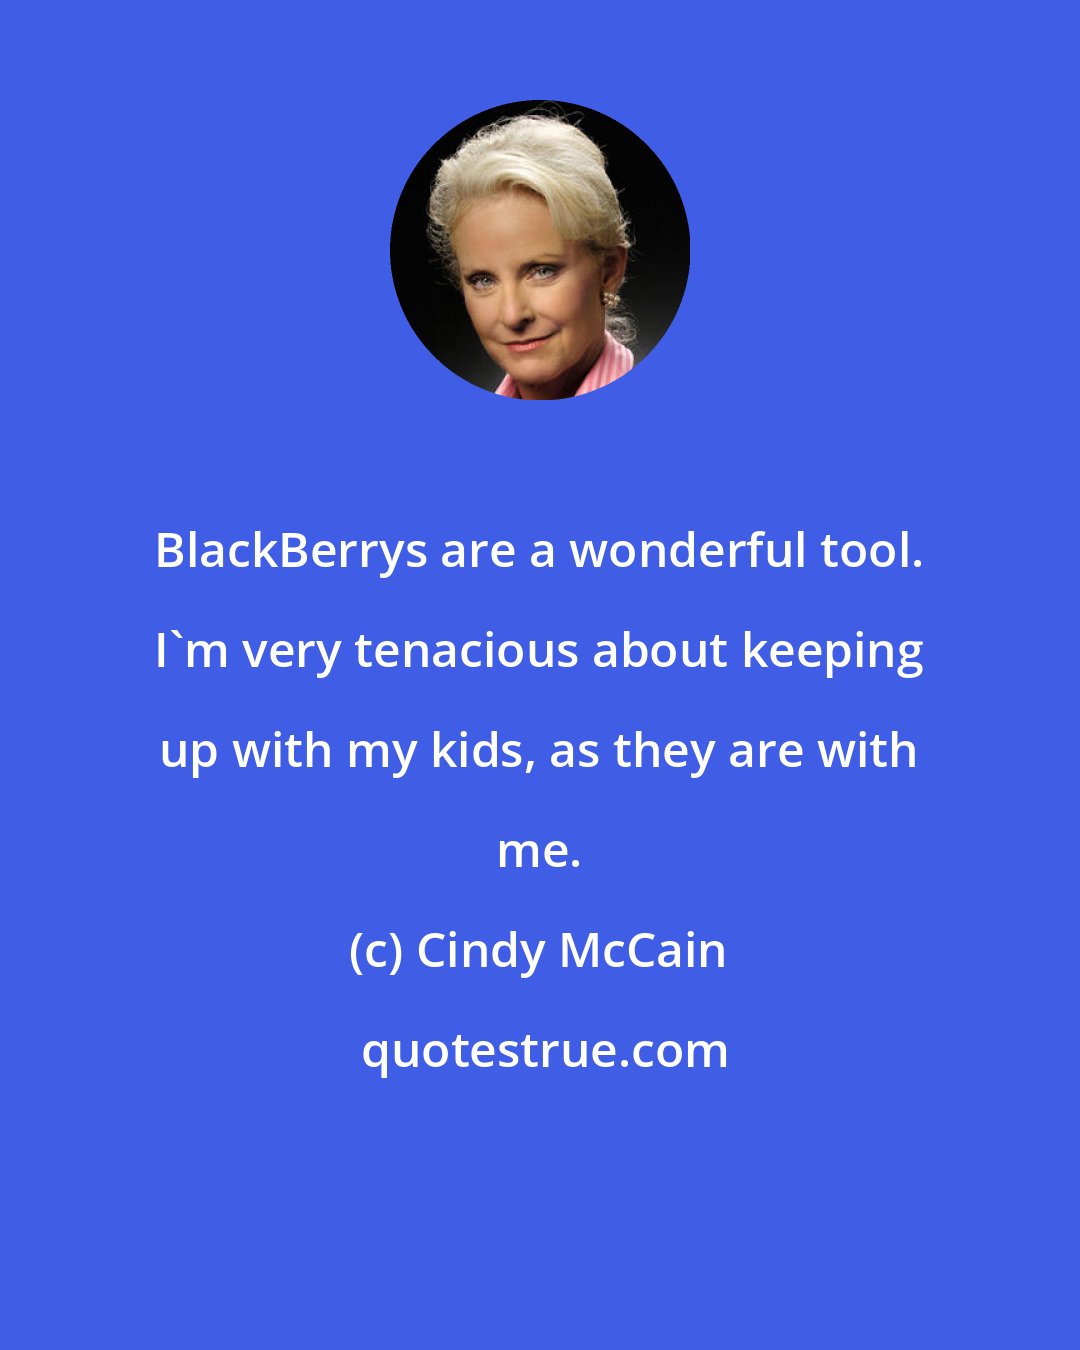 Cindy McCain: BlackBerrys are a wonderful tool. I'm very tenacious about keeping up with my kids, as they are with me.